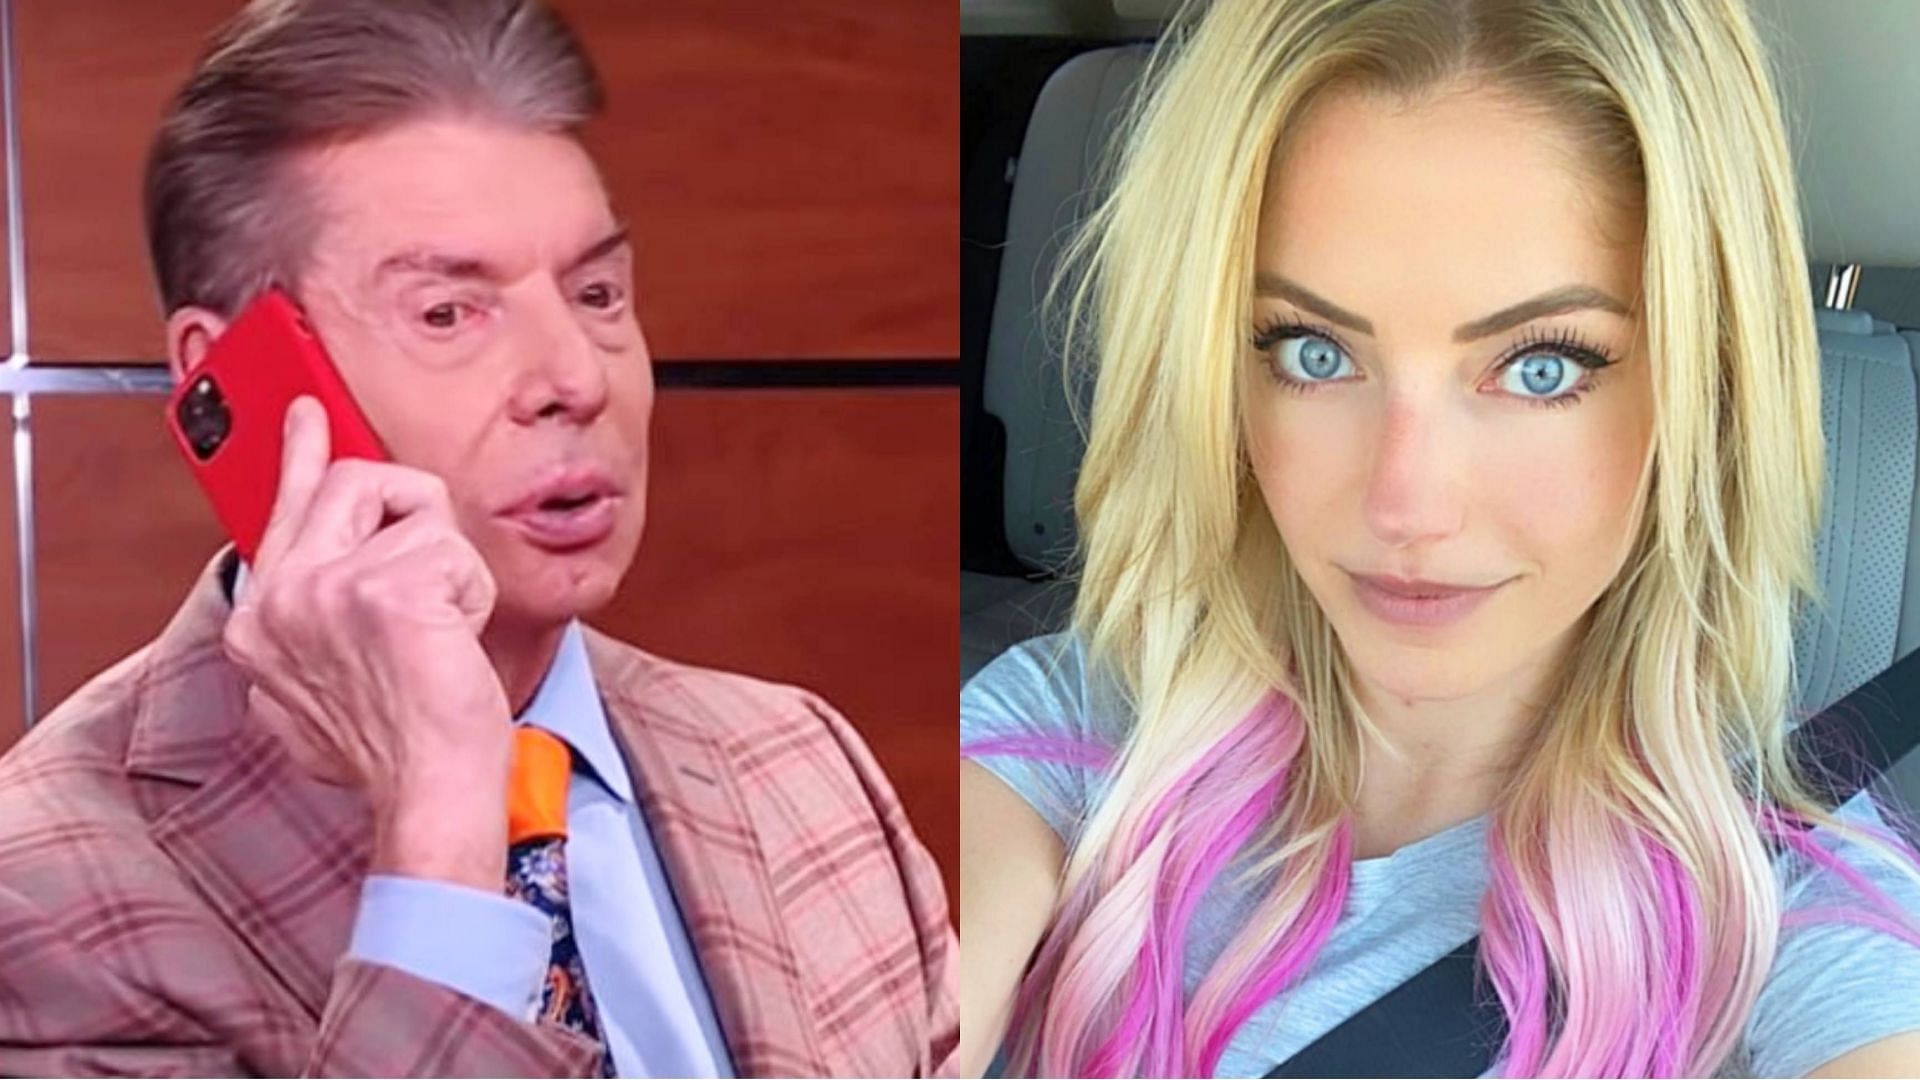 Vince McMahon (left) and Alexa Bliss (right)